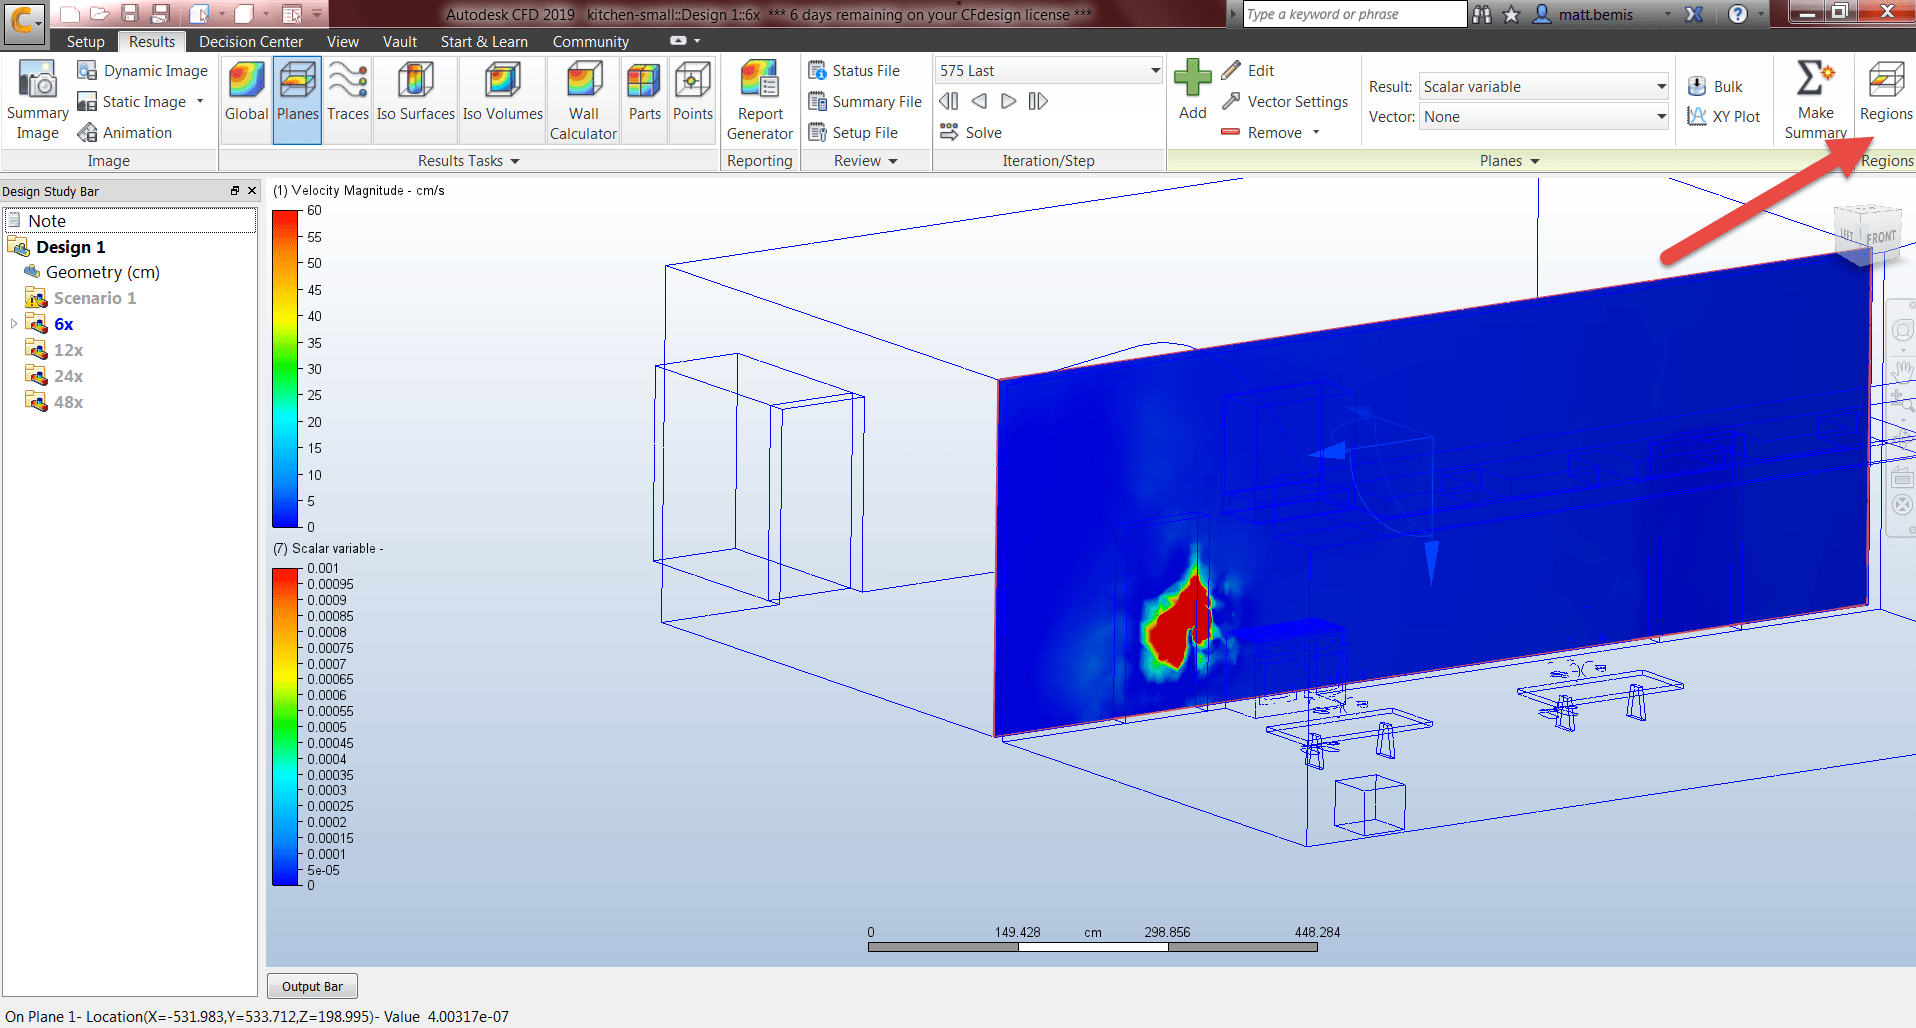 Screenshot of Autocad CFD with arrow pointing to the softare's regions button located in the ribbon.